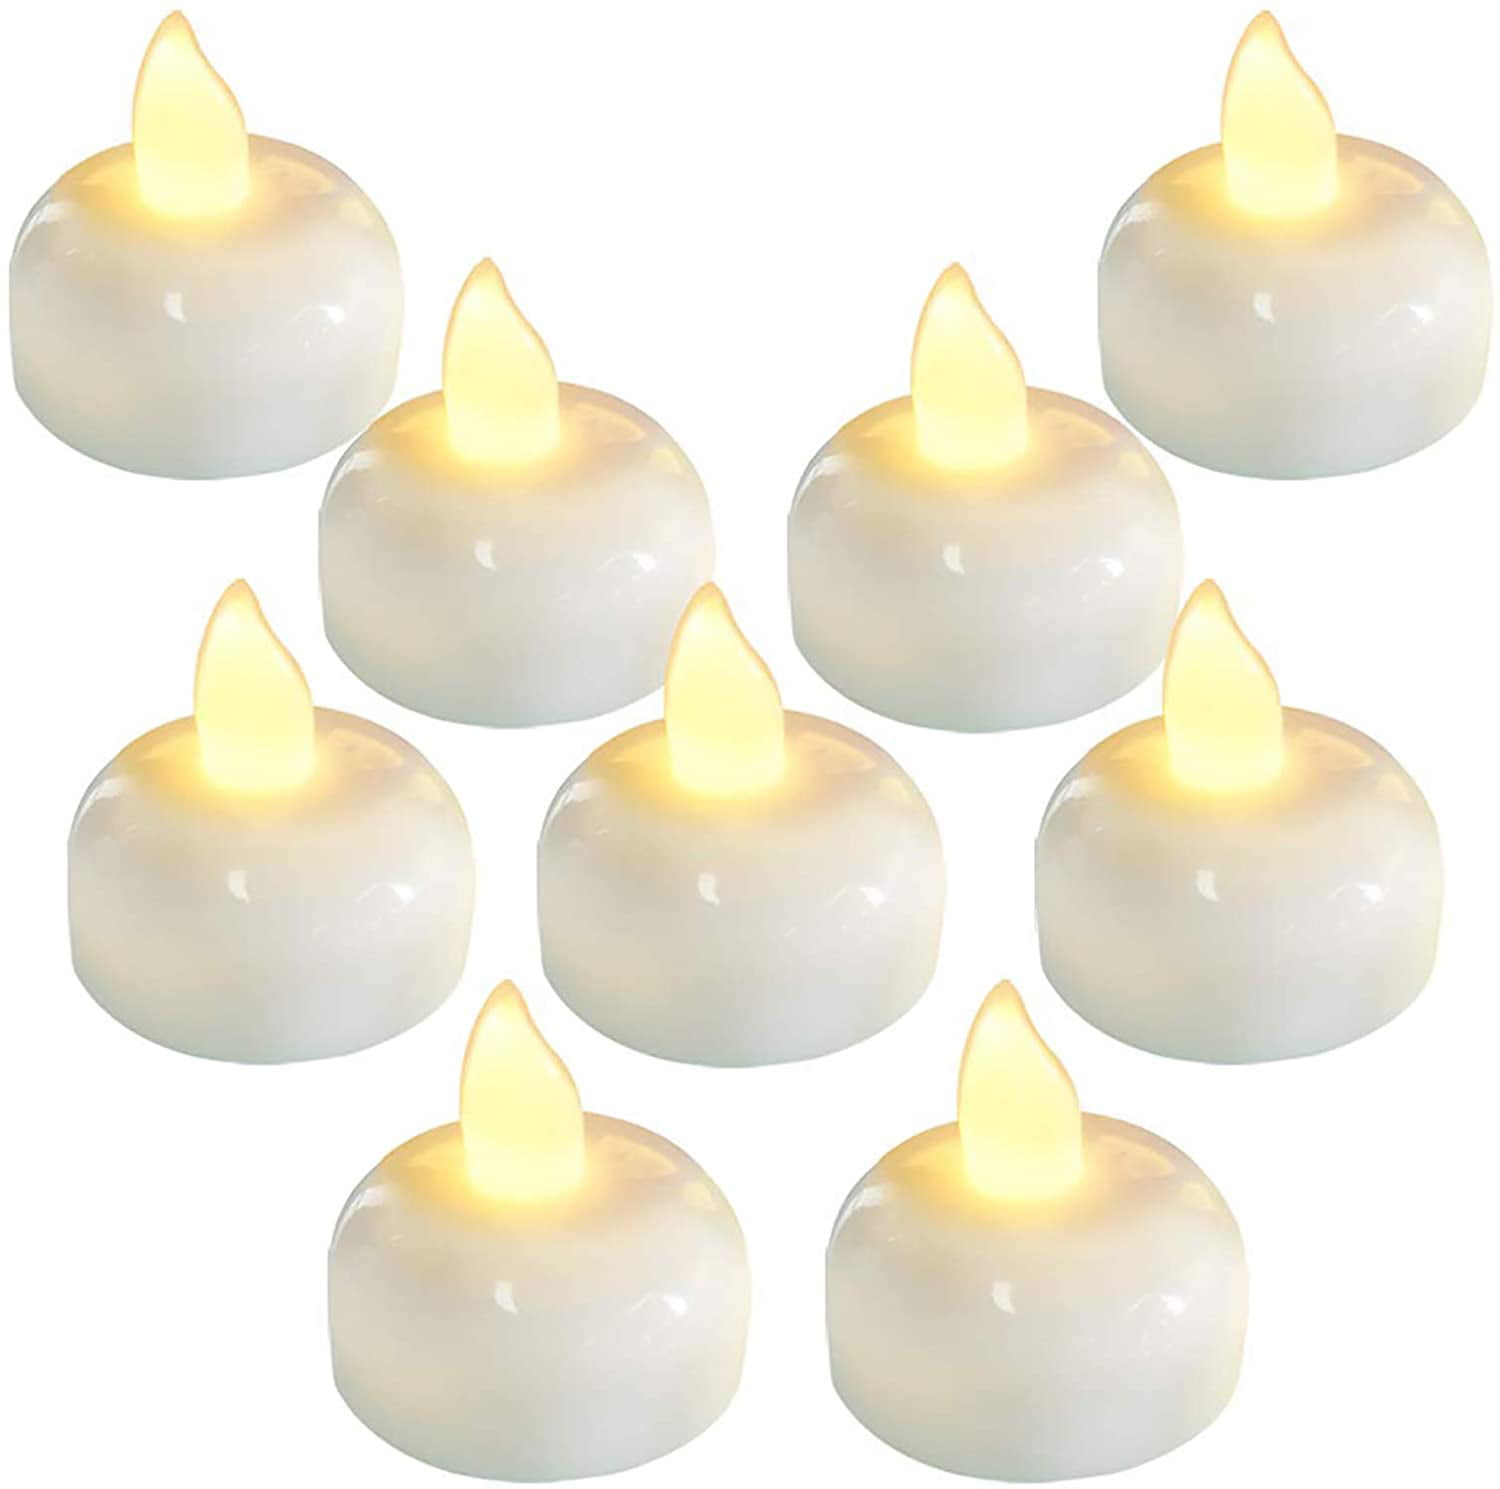 12 Flameless Floating waterproof LED tealight Candle Battery operated tea lights 